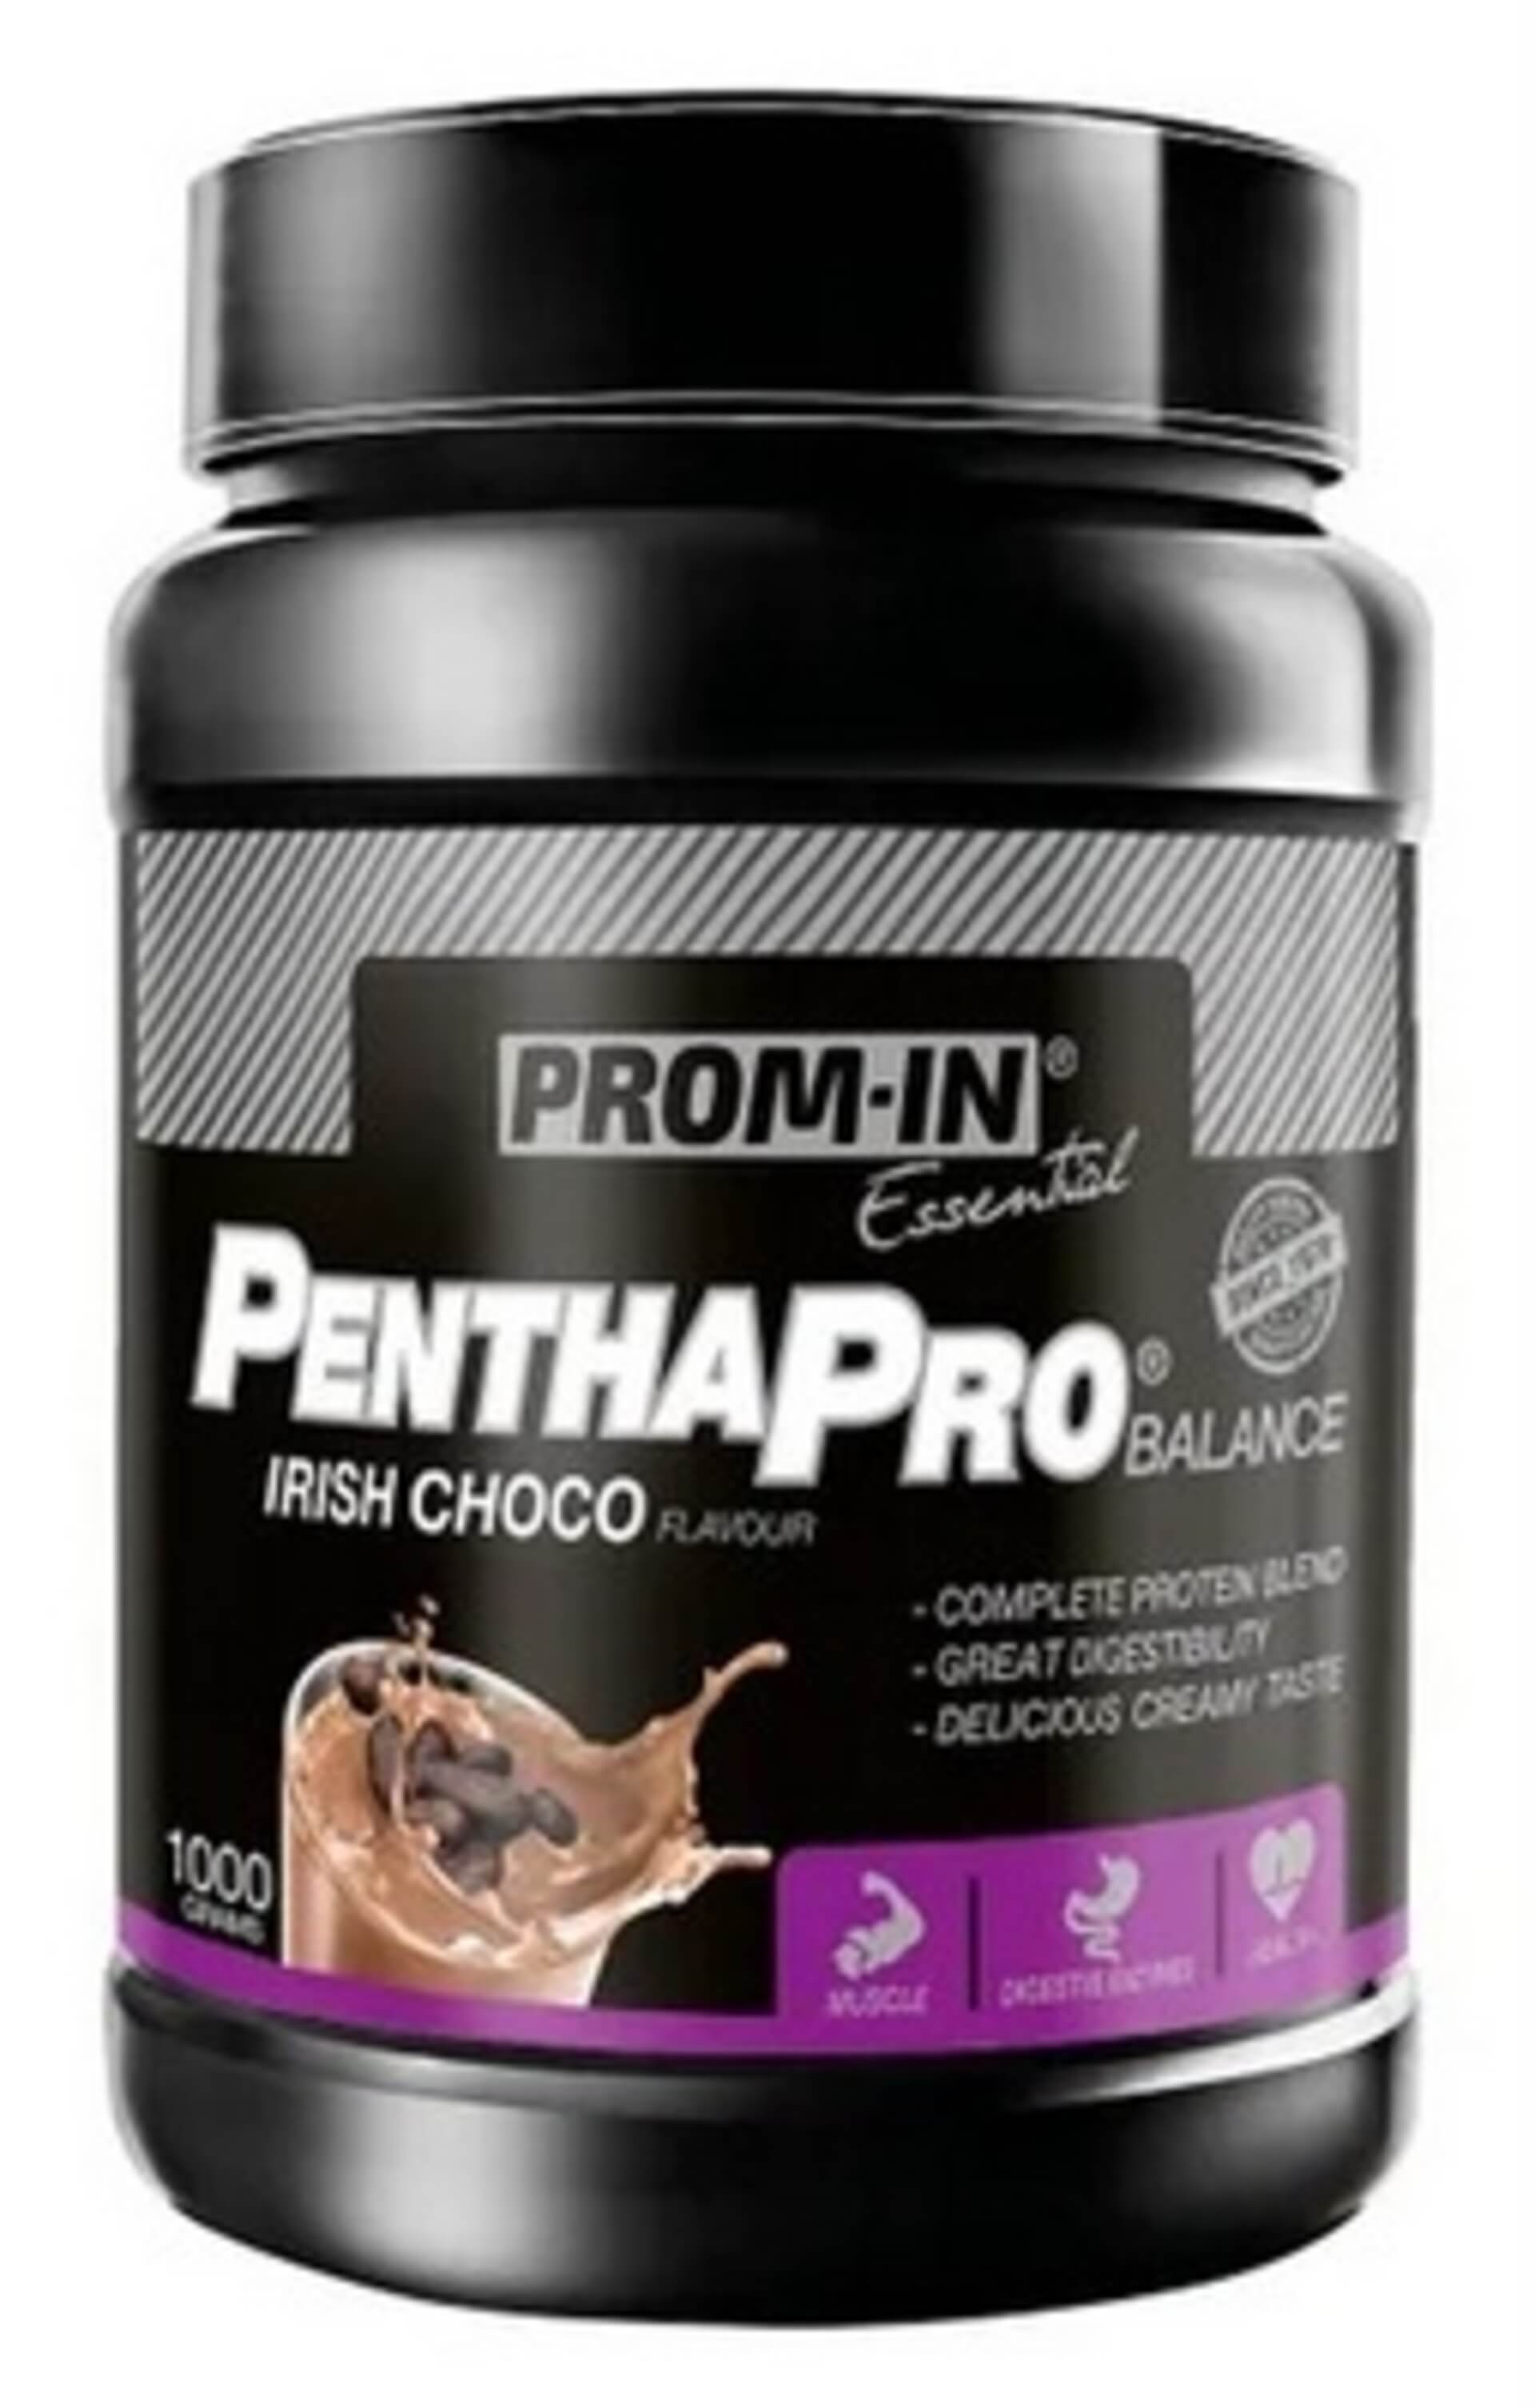 E-shop Prom-IN PenthaPro Balance 1000 g